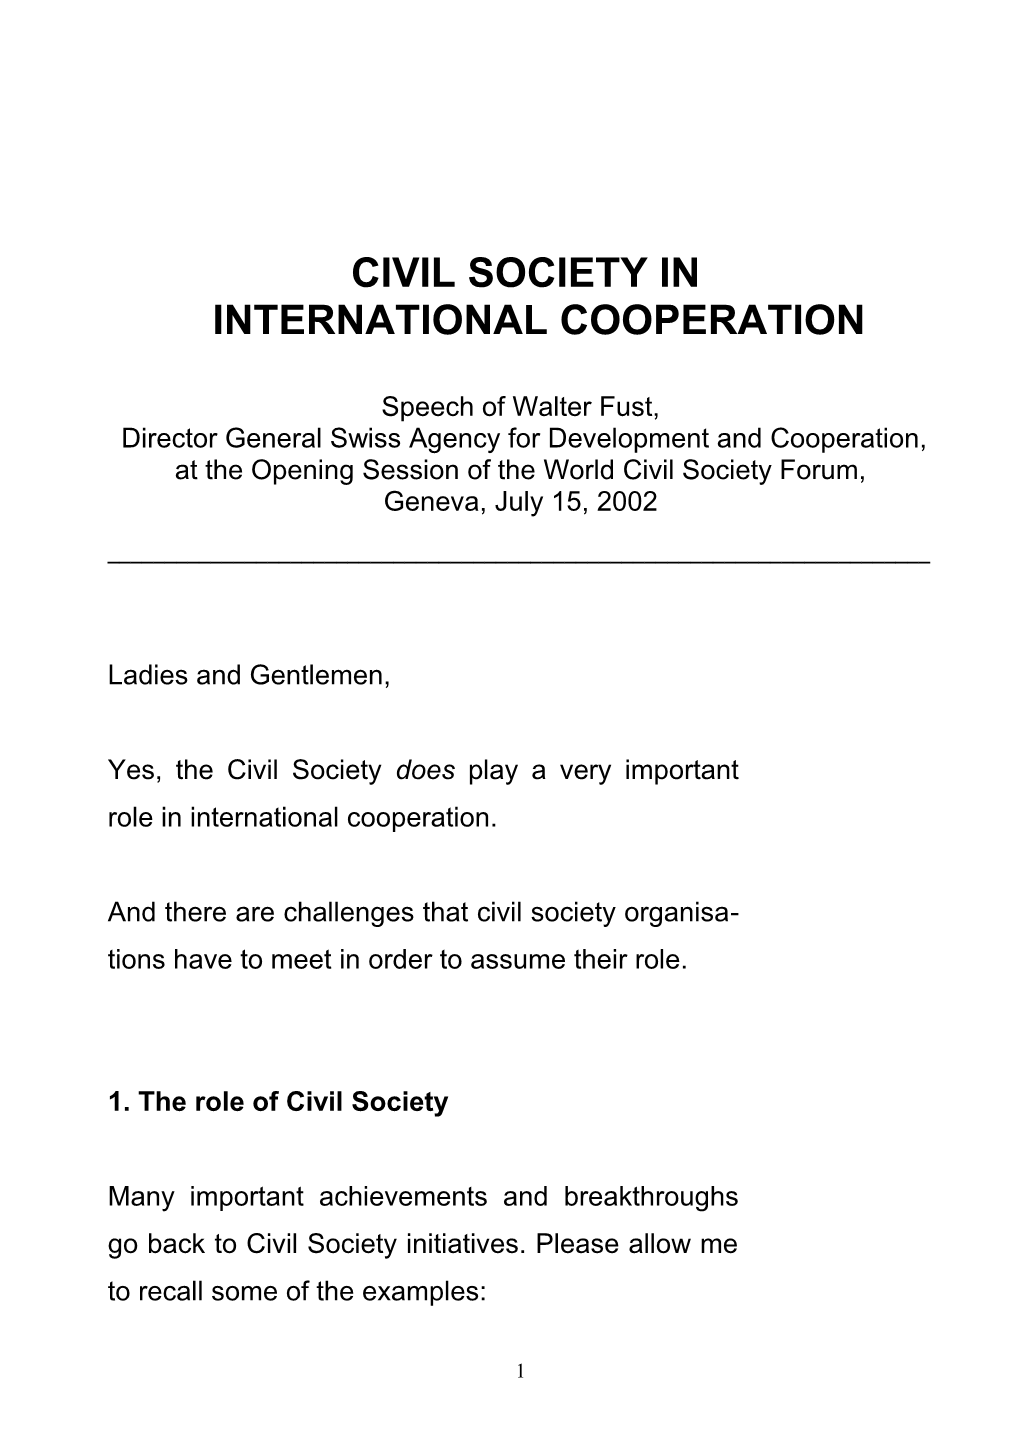 The Civil Society Is Nowadays Generally Recognised As the Third Major Force That Next To